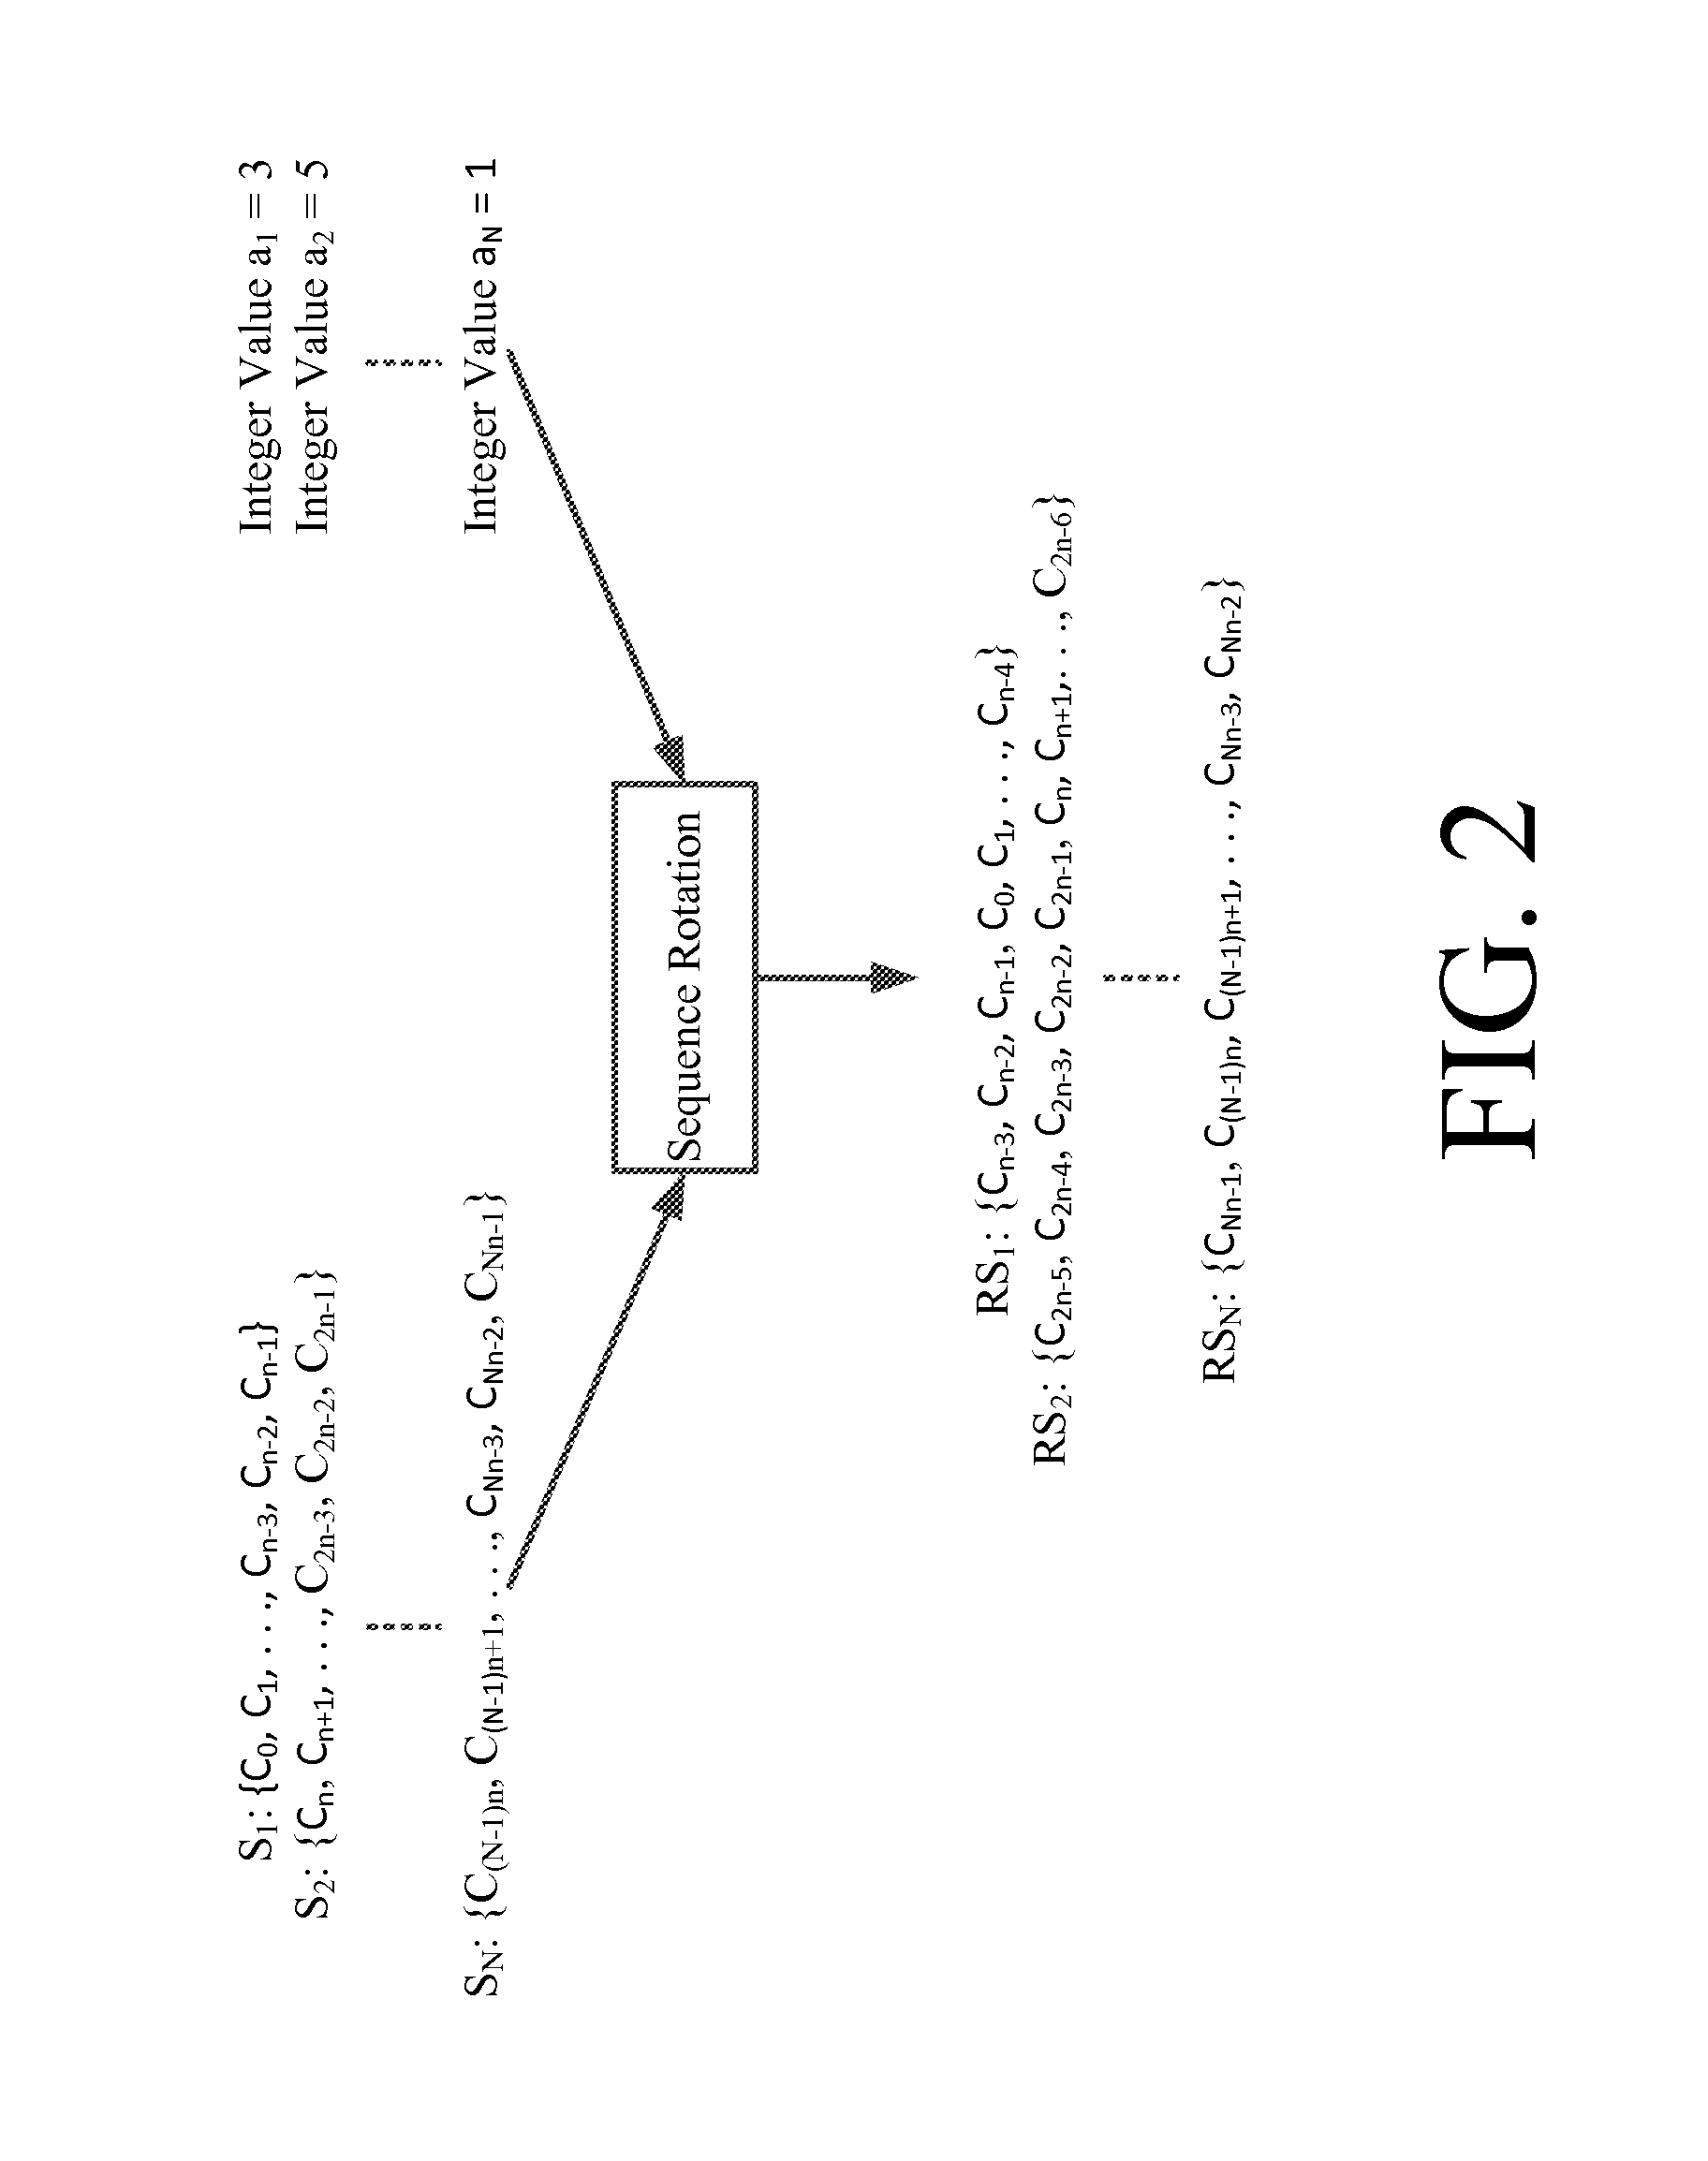 Systems and methods for pulse rotation modulation encoding and decoding